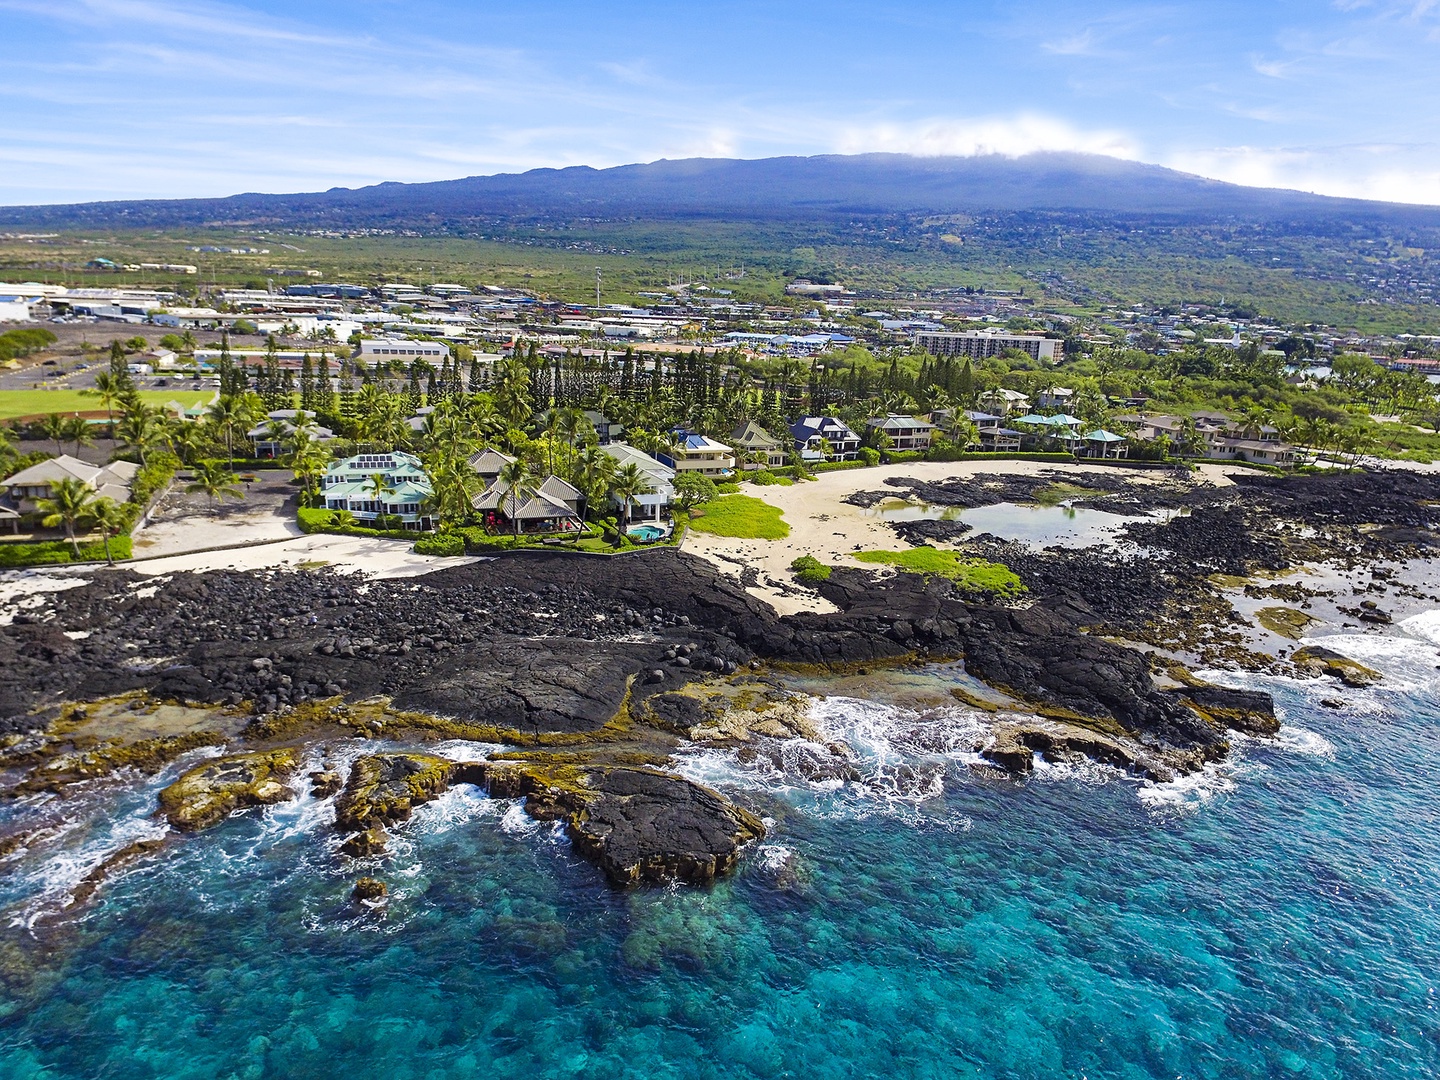 Kailua Kona Vacation Rentals, Kona Blue - Crystal clear Pacific waters as far as the eye can see!